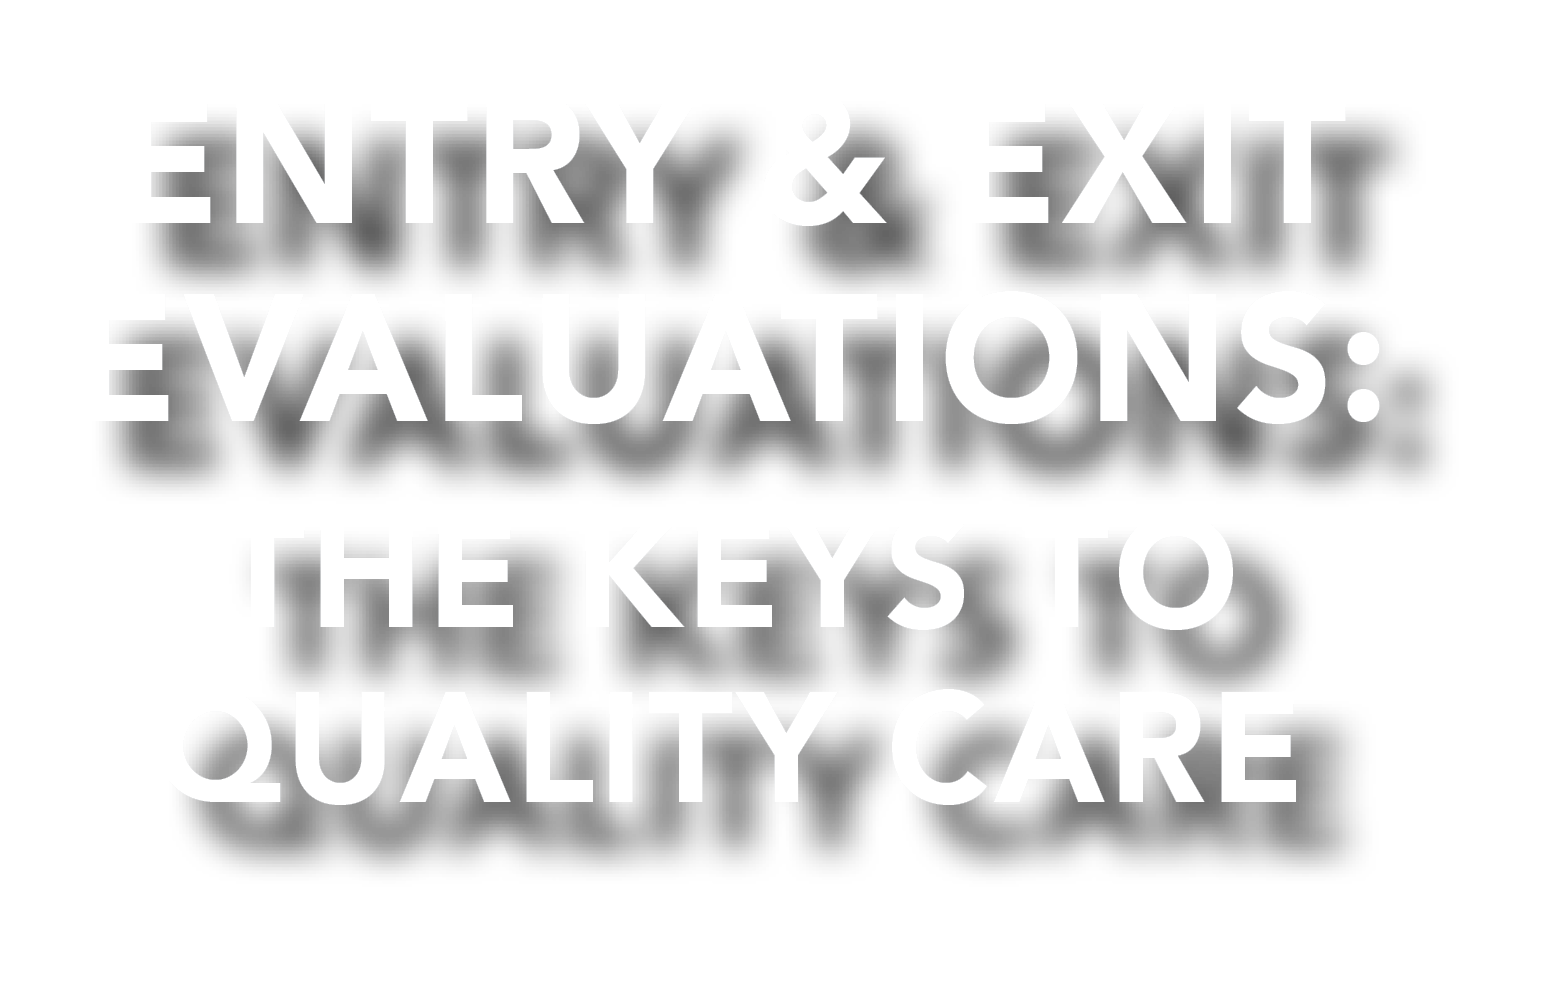 Entry and Exit Evaluations: The Keys to Quality Care